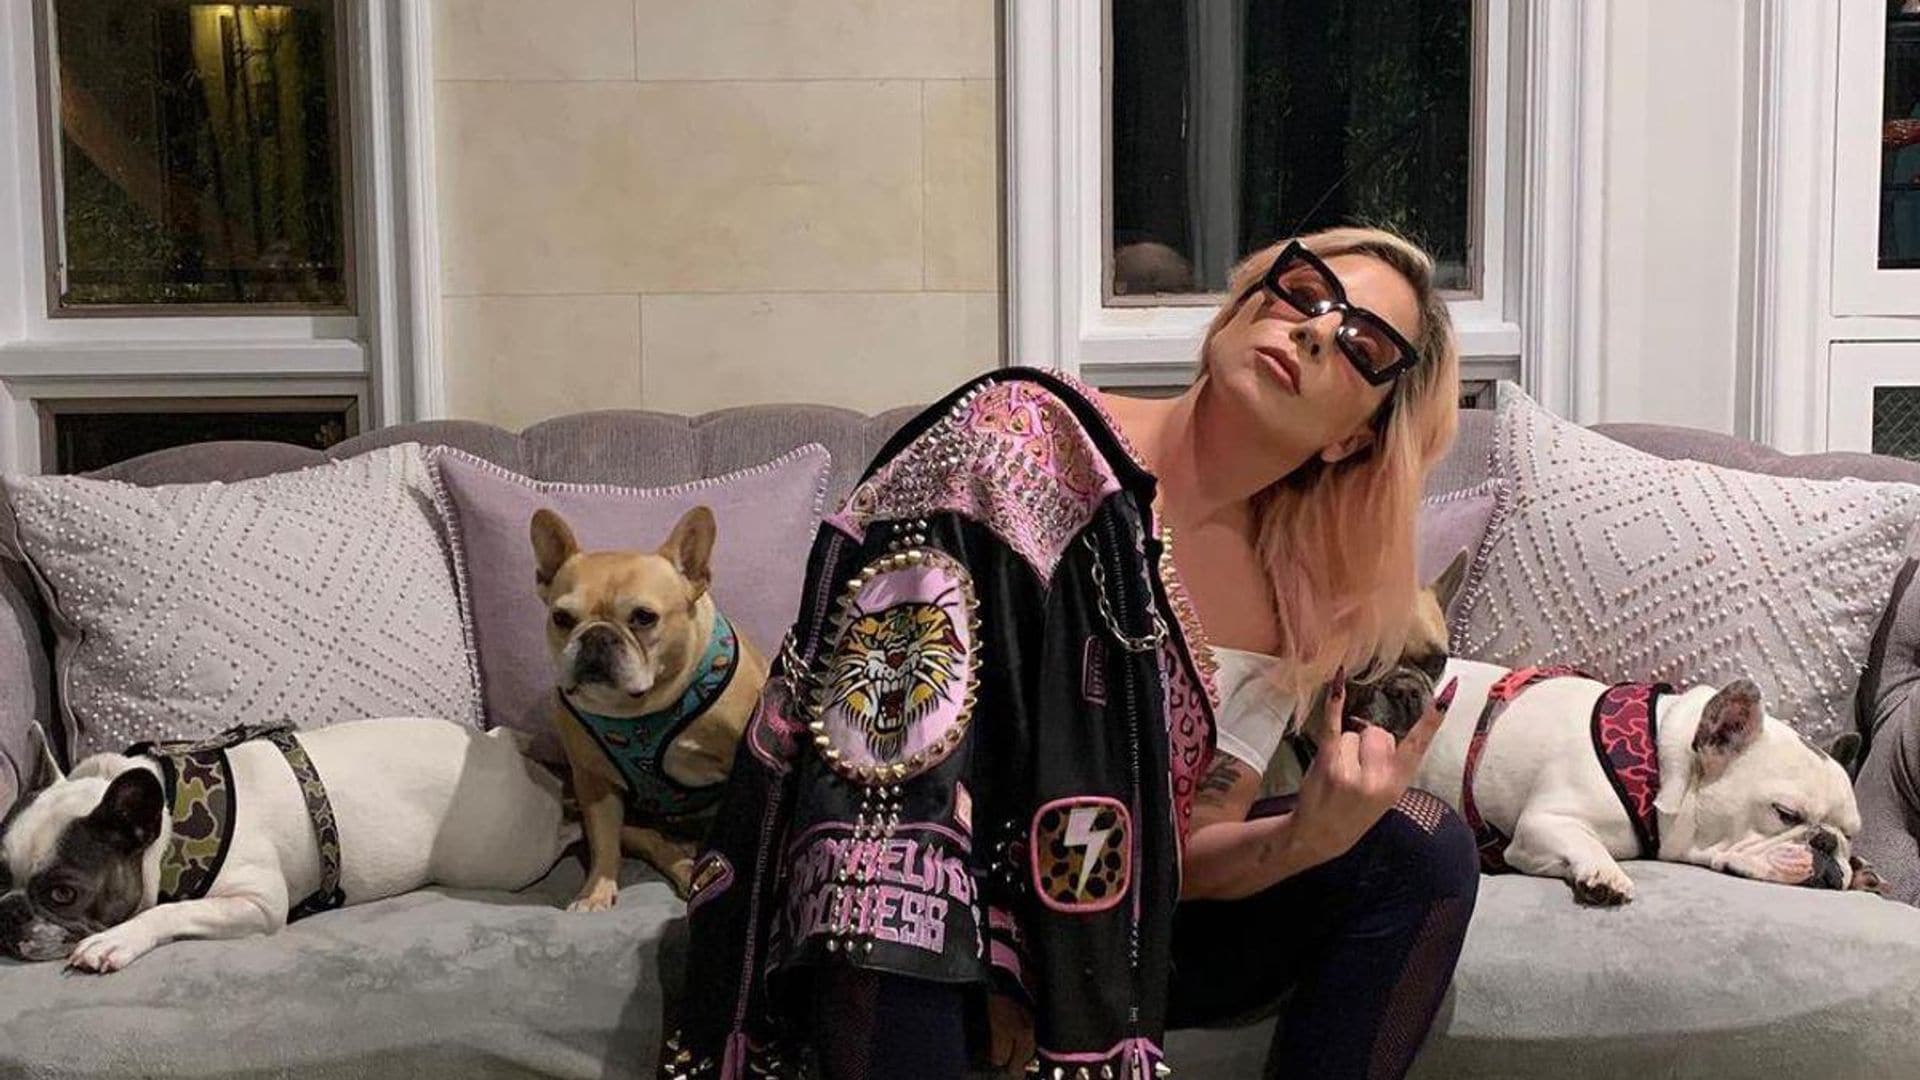 Lady Gaga sued by woman involved in her dognapping, seeking reward and other damages